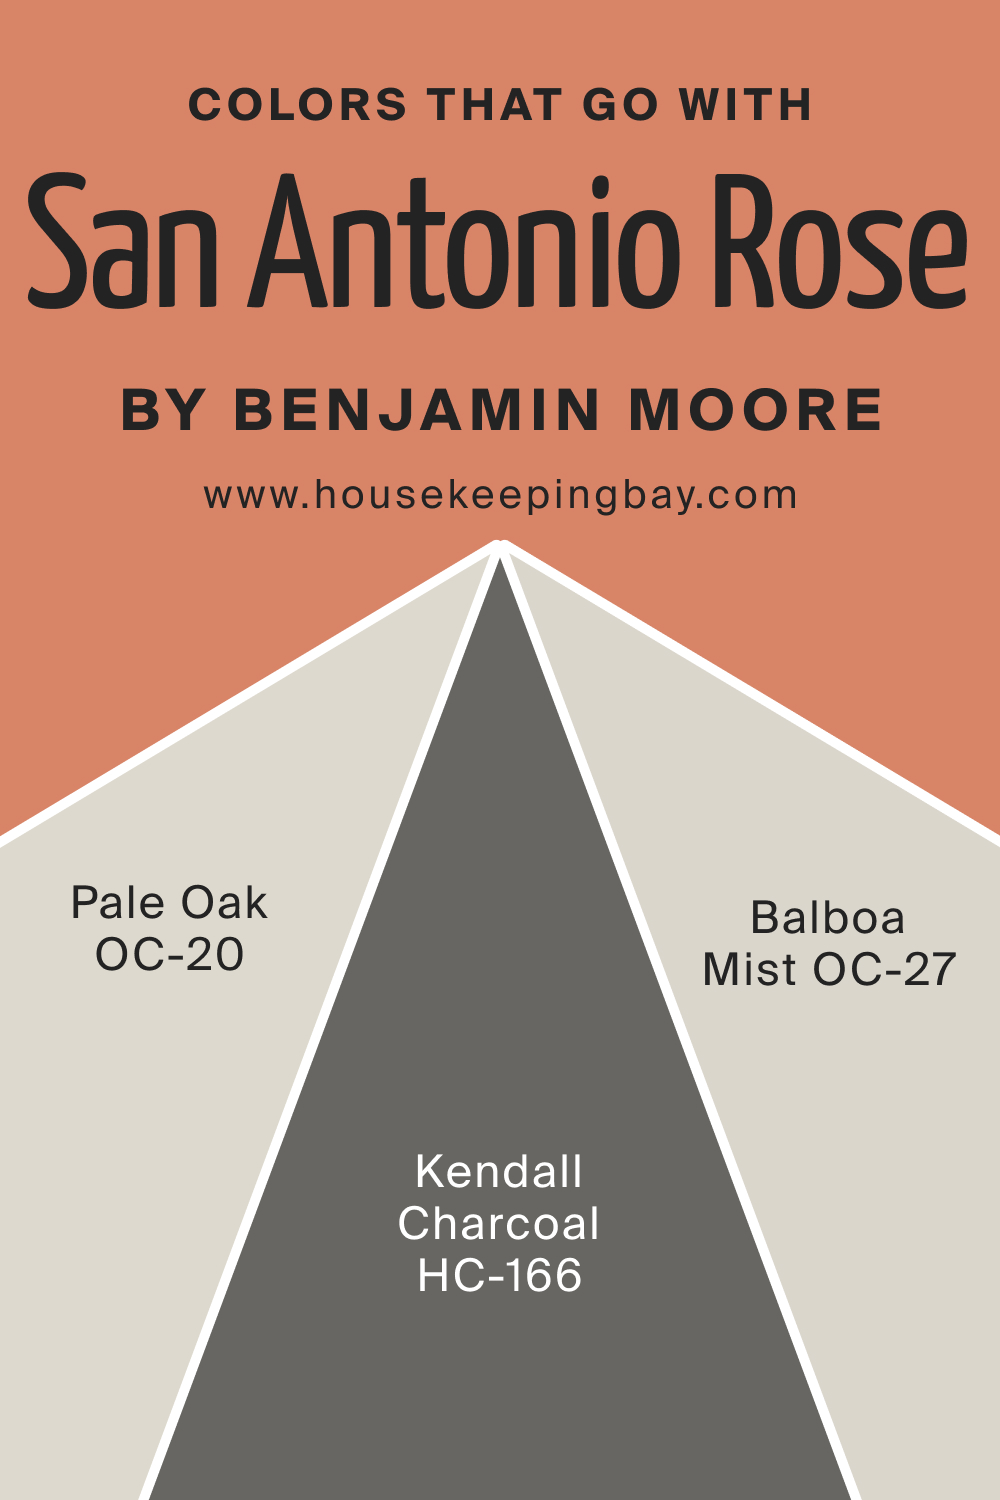 Colors that goes with San Antonio Rose 027 by Benjamin Moore